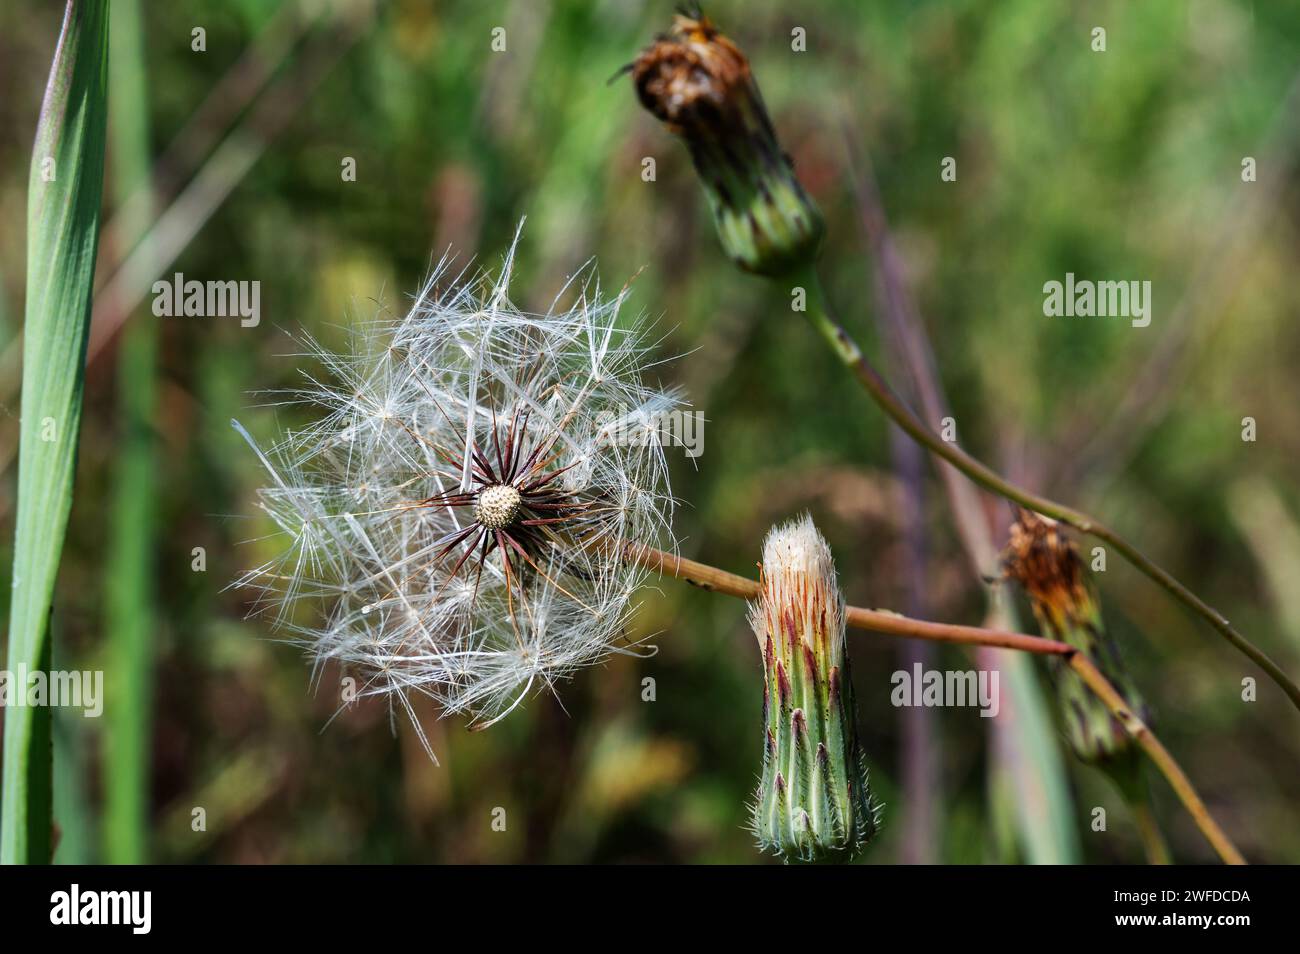 Wild lettuce Lactuca virosa. Medicinal field plant. Close-up of a flowering and fruiting plant. Stock Photo